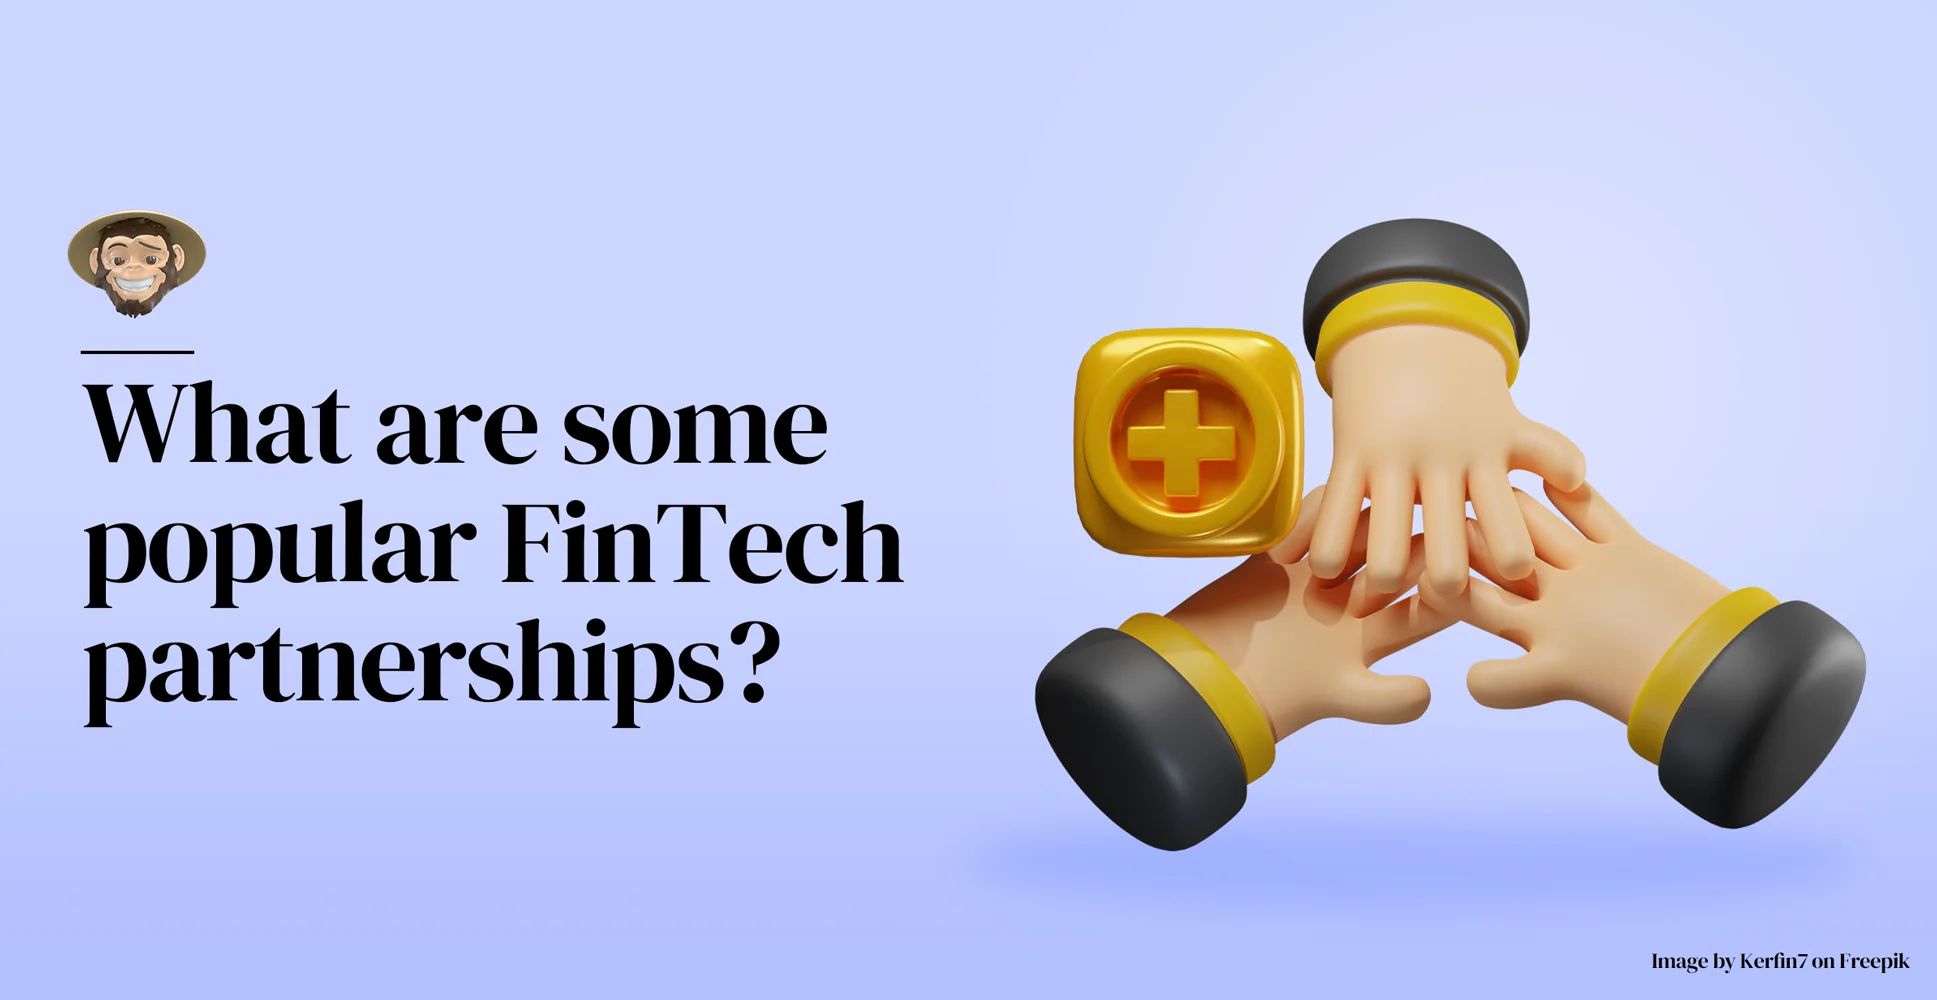 What are some popular FinTech partnerships?